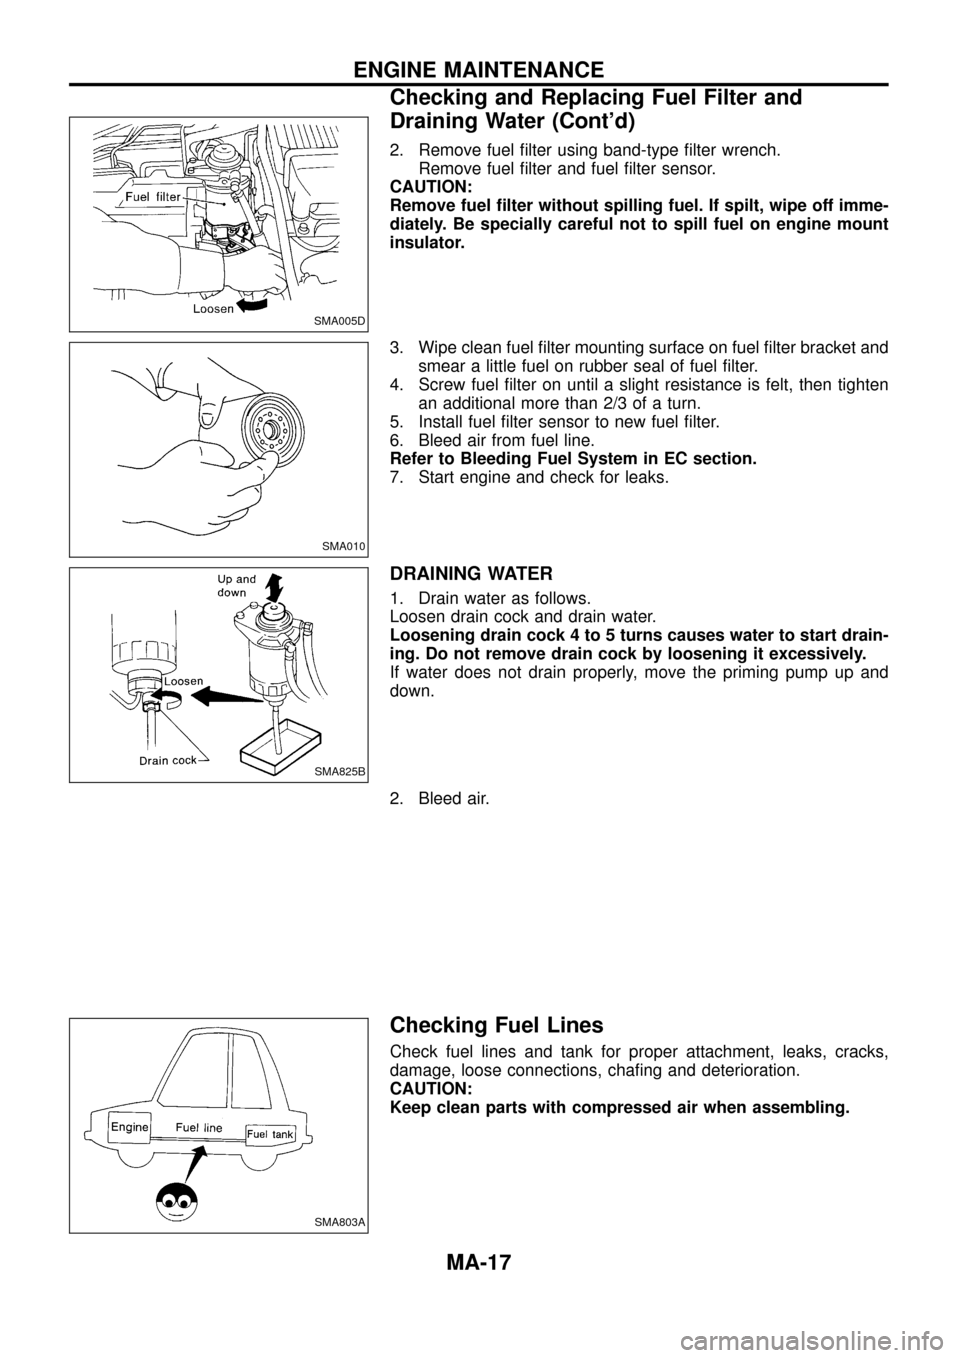 NISSAN PATROL 1998 Y61 / 5.G Maintenance User Guide 2. Remove fuel ®lter using band-type ®lter wrench.
Remove fuel ®lter and fuel ®lter sensor.
CAUTION:
Remove fuel ®lter without spilling fuel. If spilt, wipe off imme-
diately. Be specially carefu